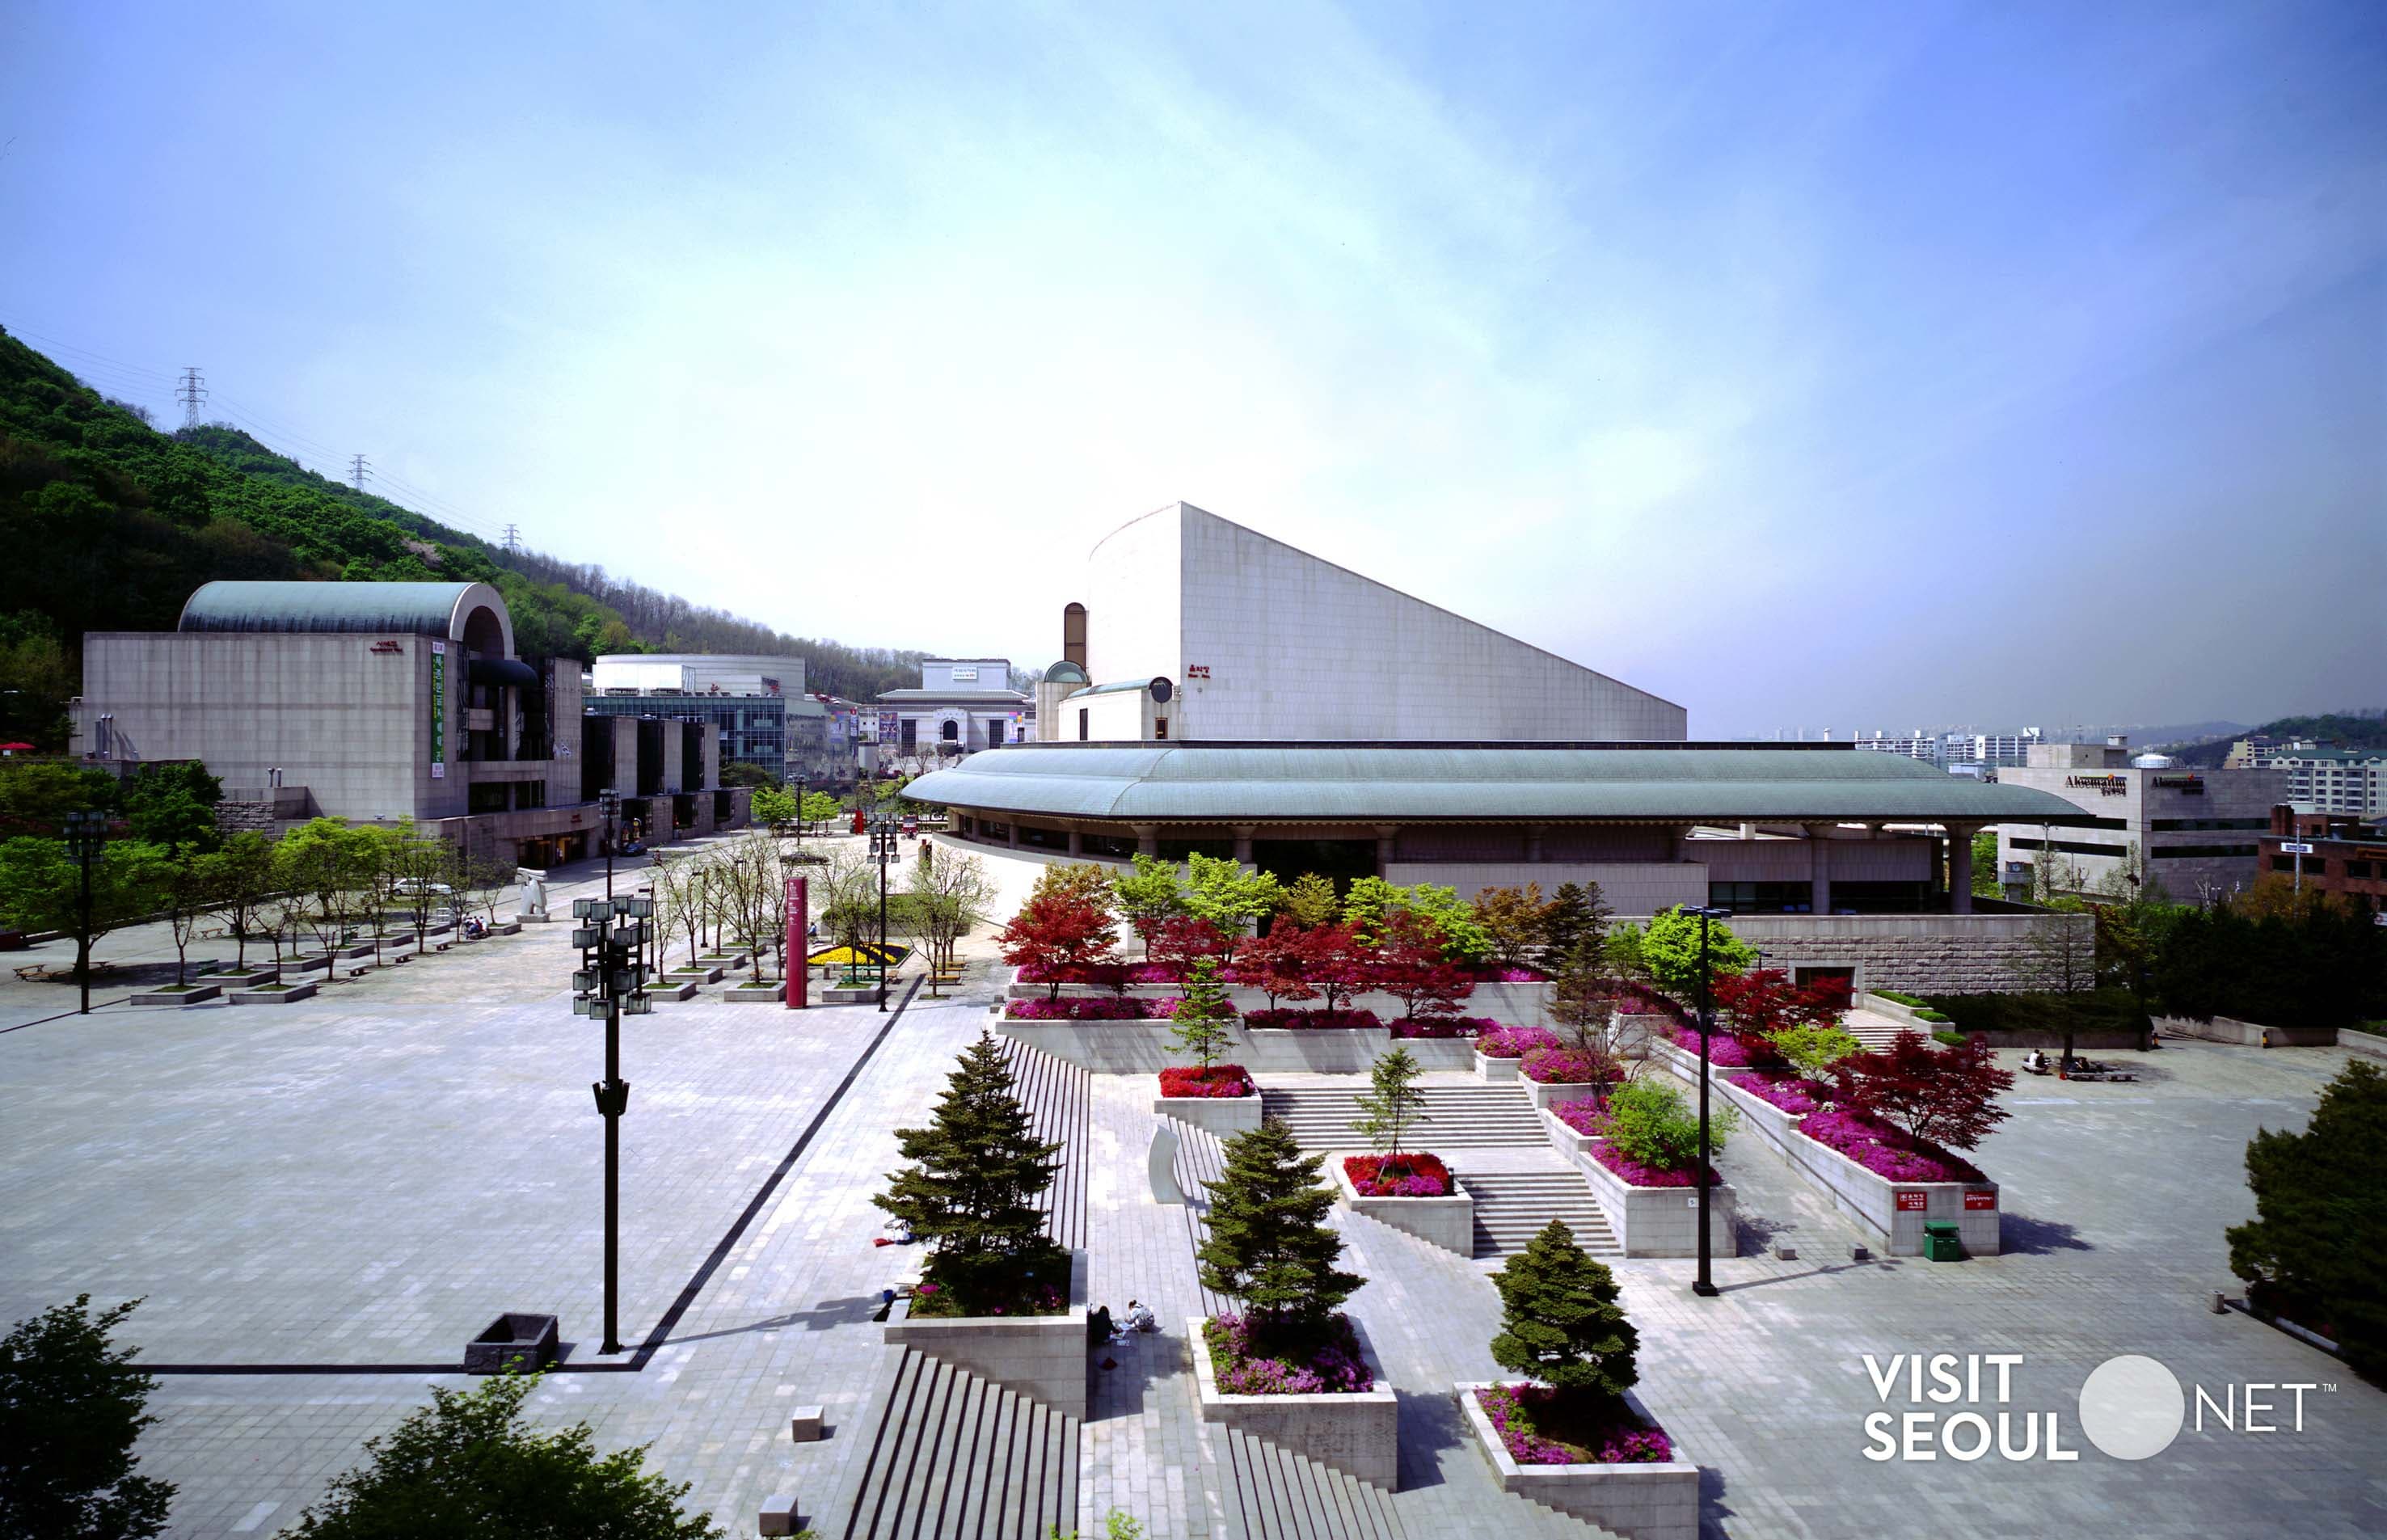 Music Hall, Seoul Arts Center0 : Exterior view of the Music Hall with colorful flowerbed